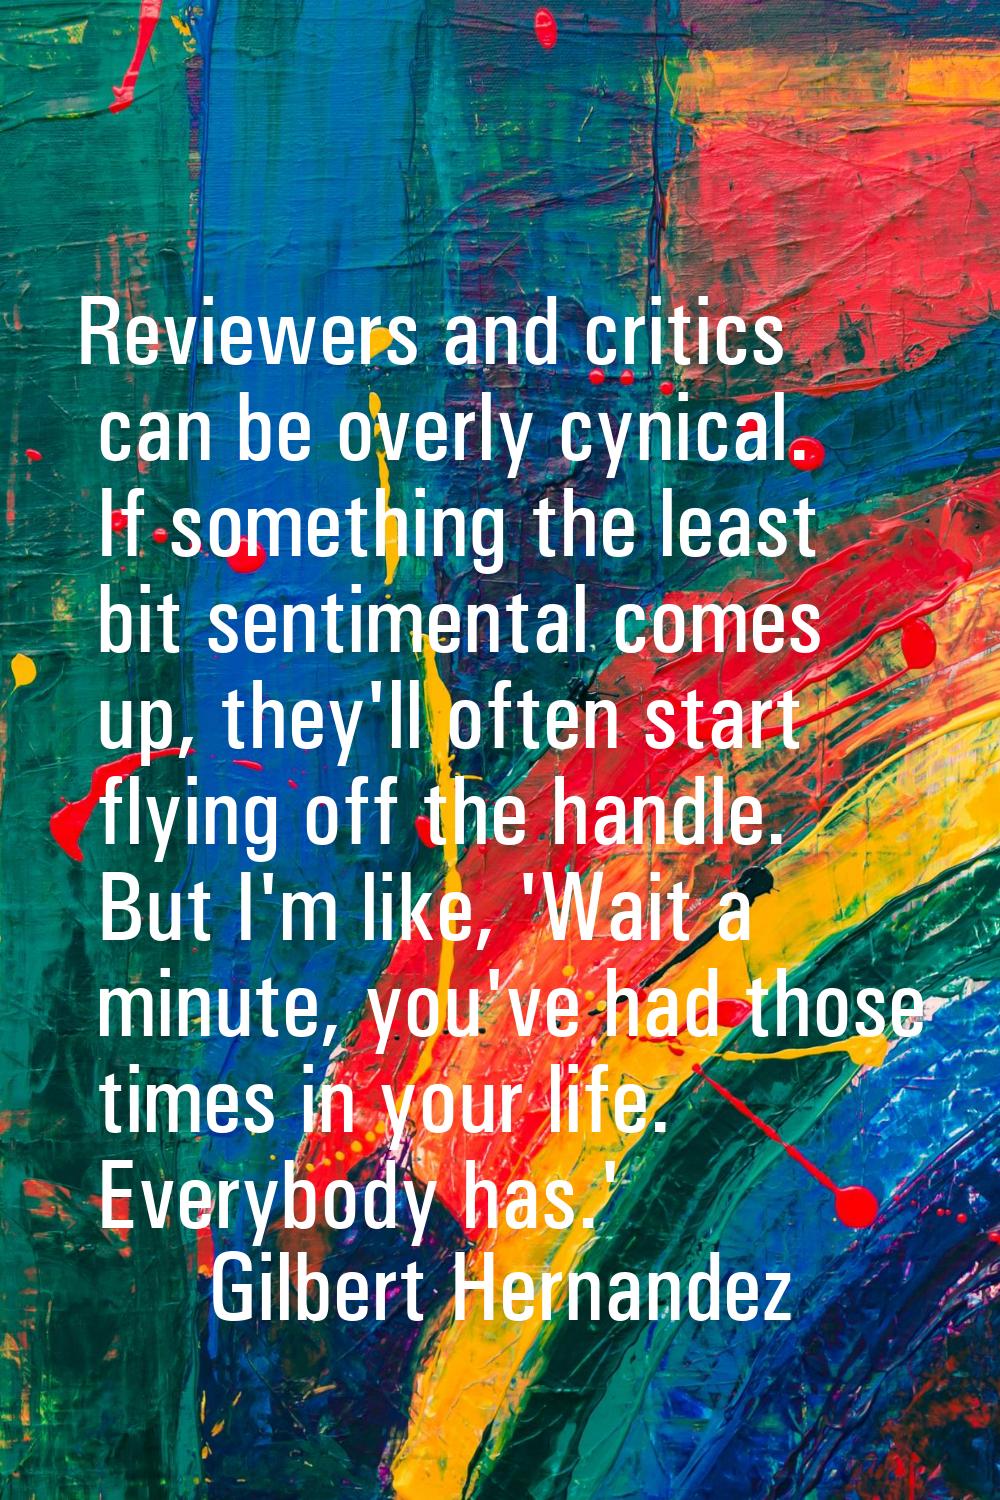 Reviewers and critics can be overly cynical. If something the least bit sentimental comes up, they'